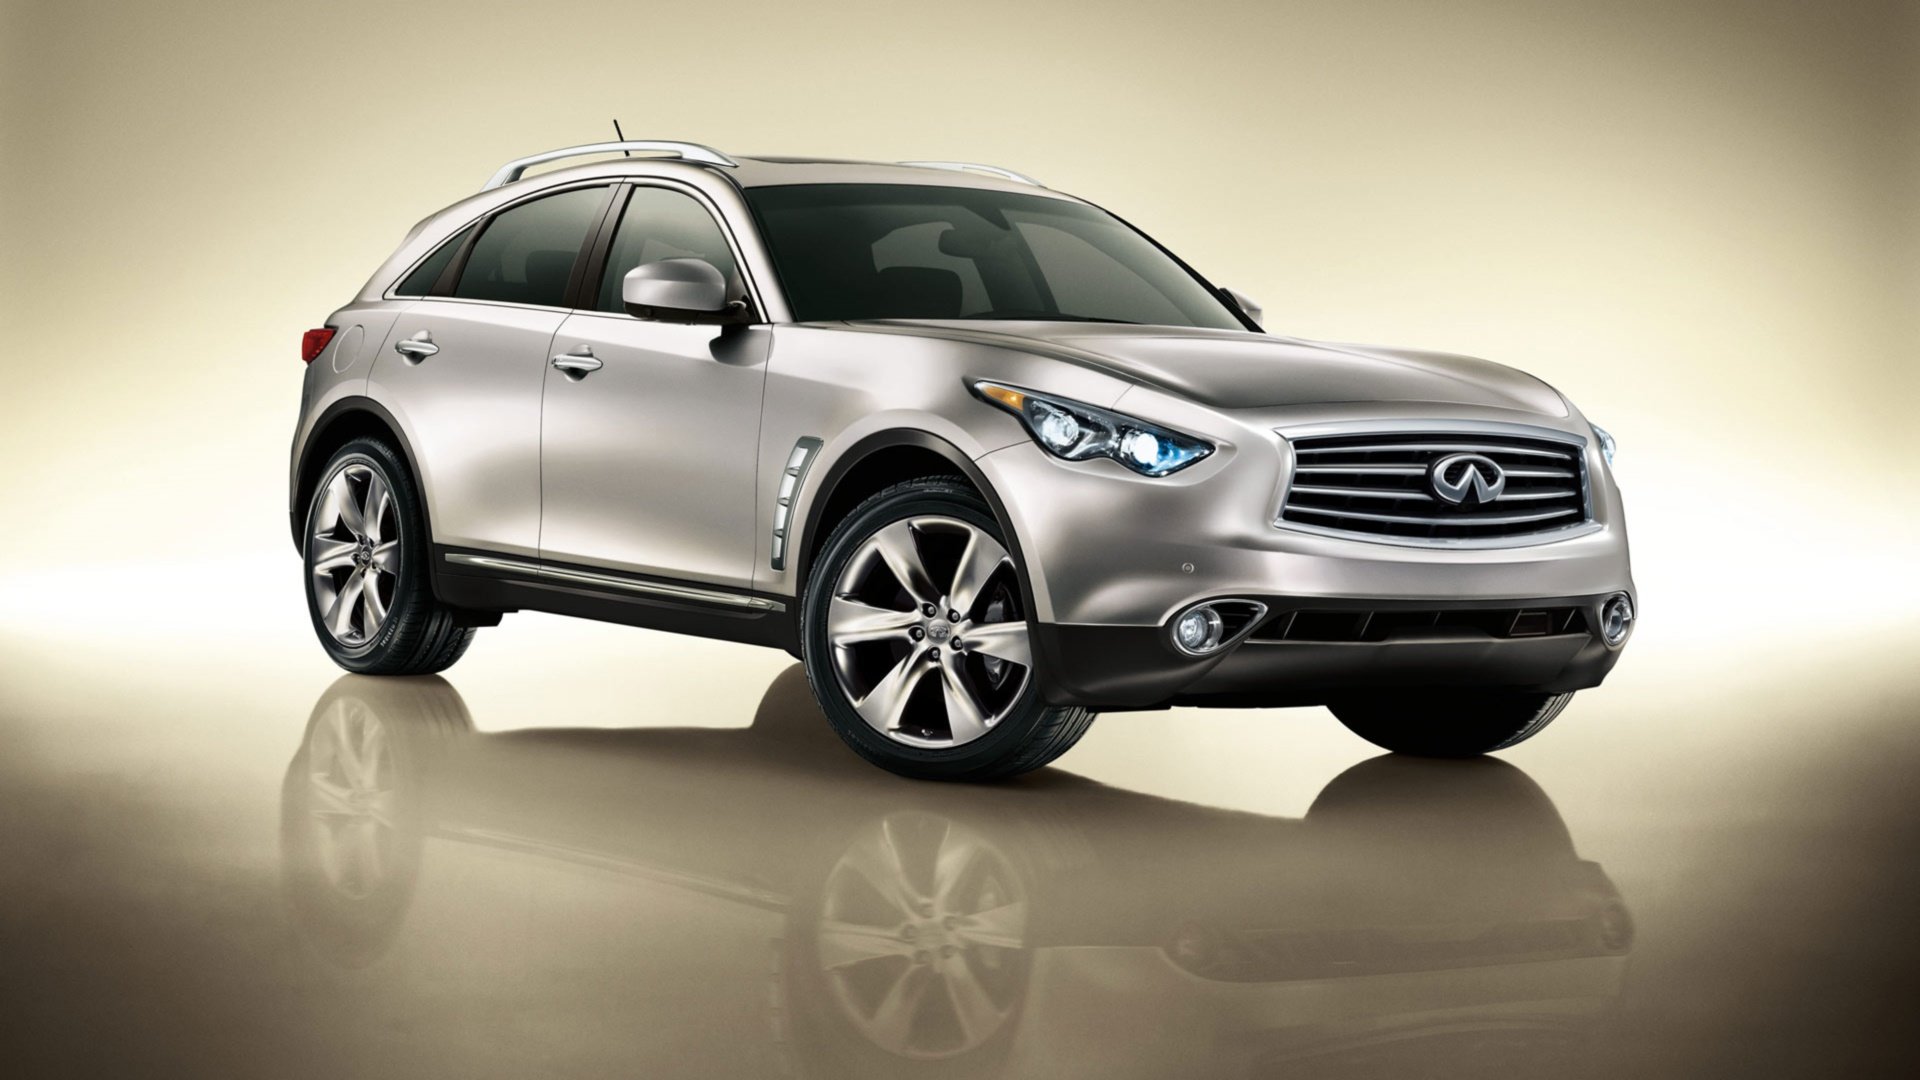 Download full hd 1920x1080 Infiniti QX70 computer background ID:77826 for free